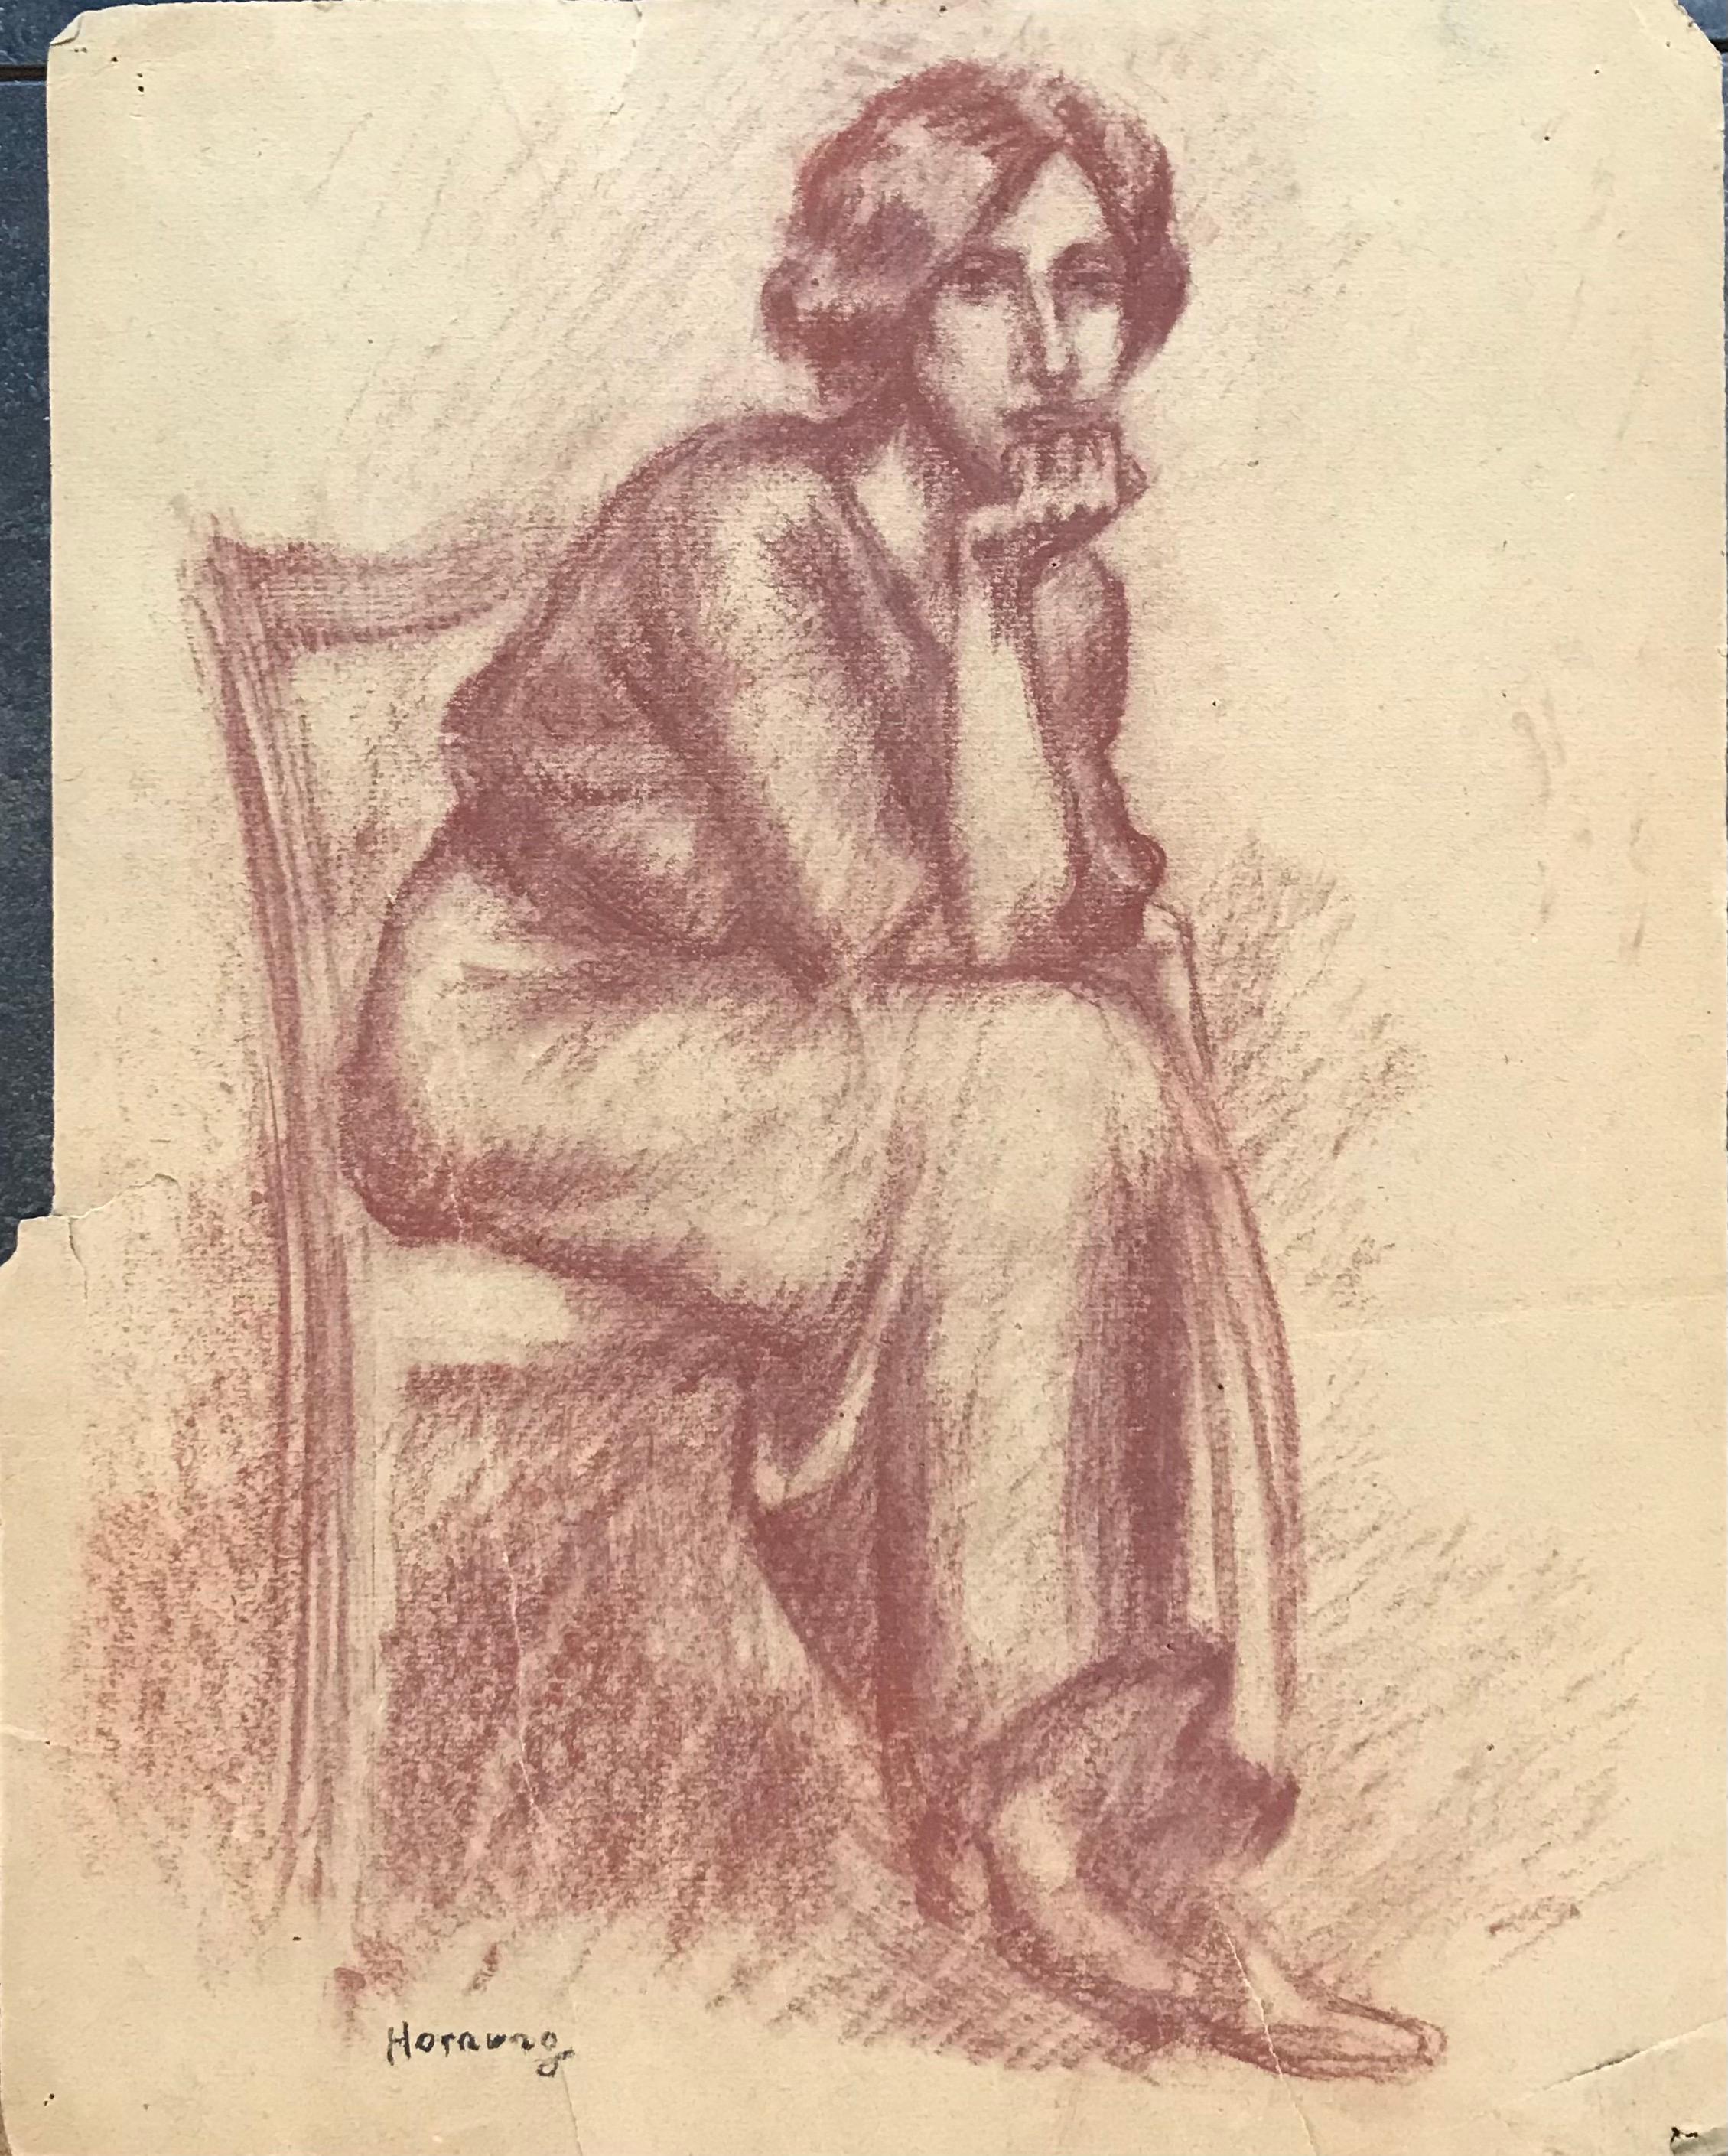 Pensive young woman by Emile Hornung - Pastel on paper 37x29 cm